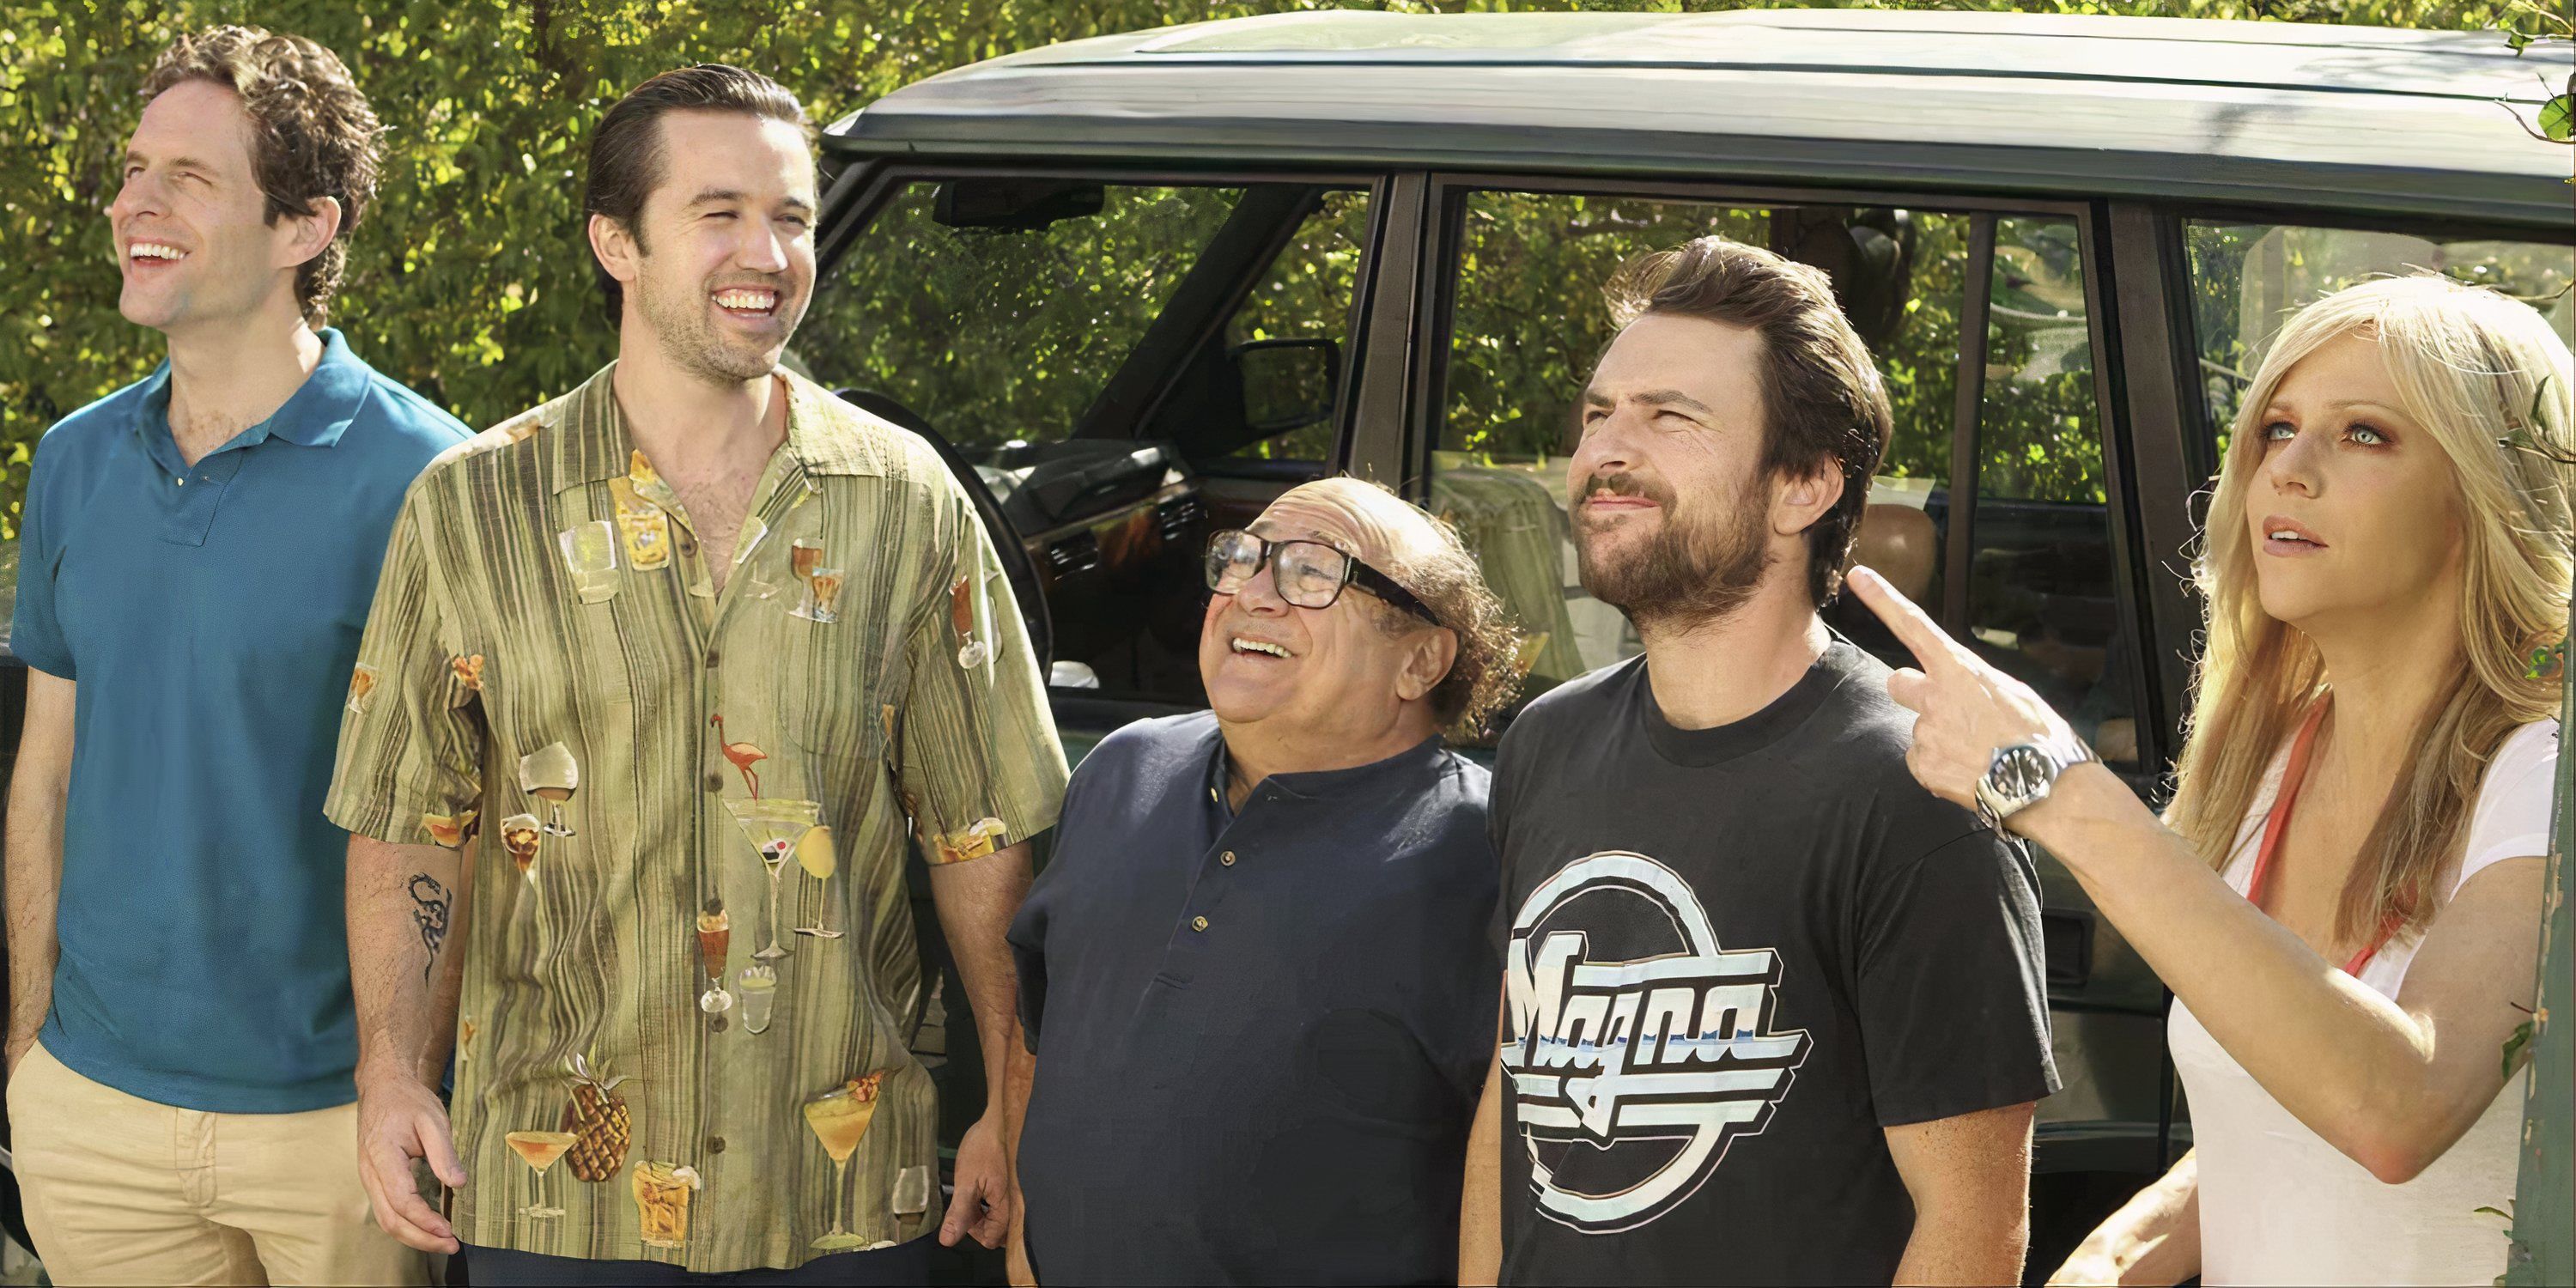 The cast of It's Always Sunny in Philadelphia standing in front of a car looking and smiling at something off-camera.